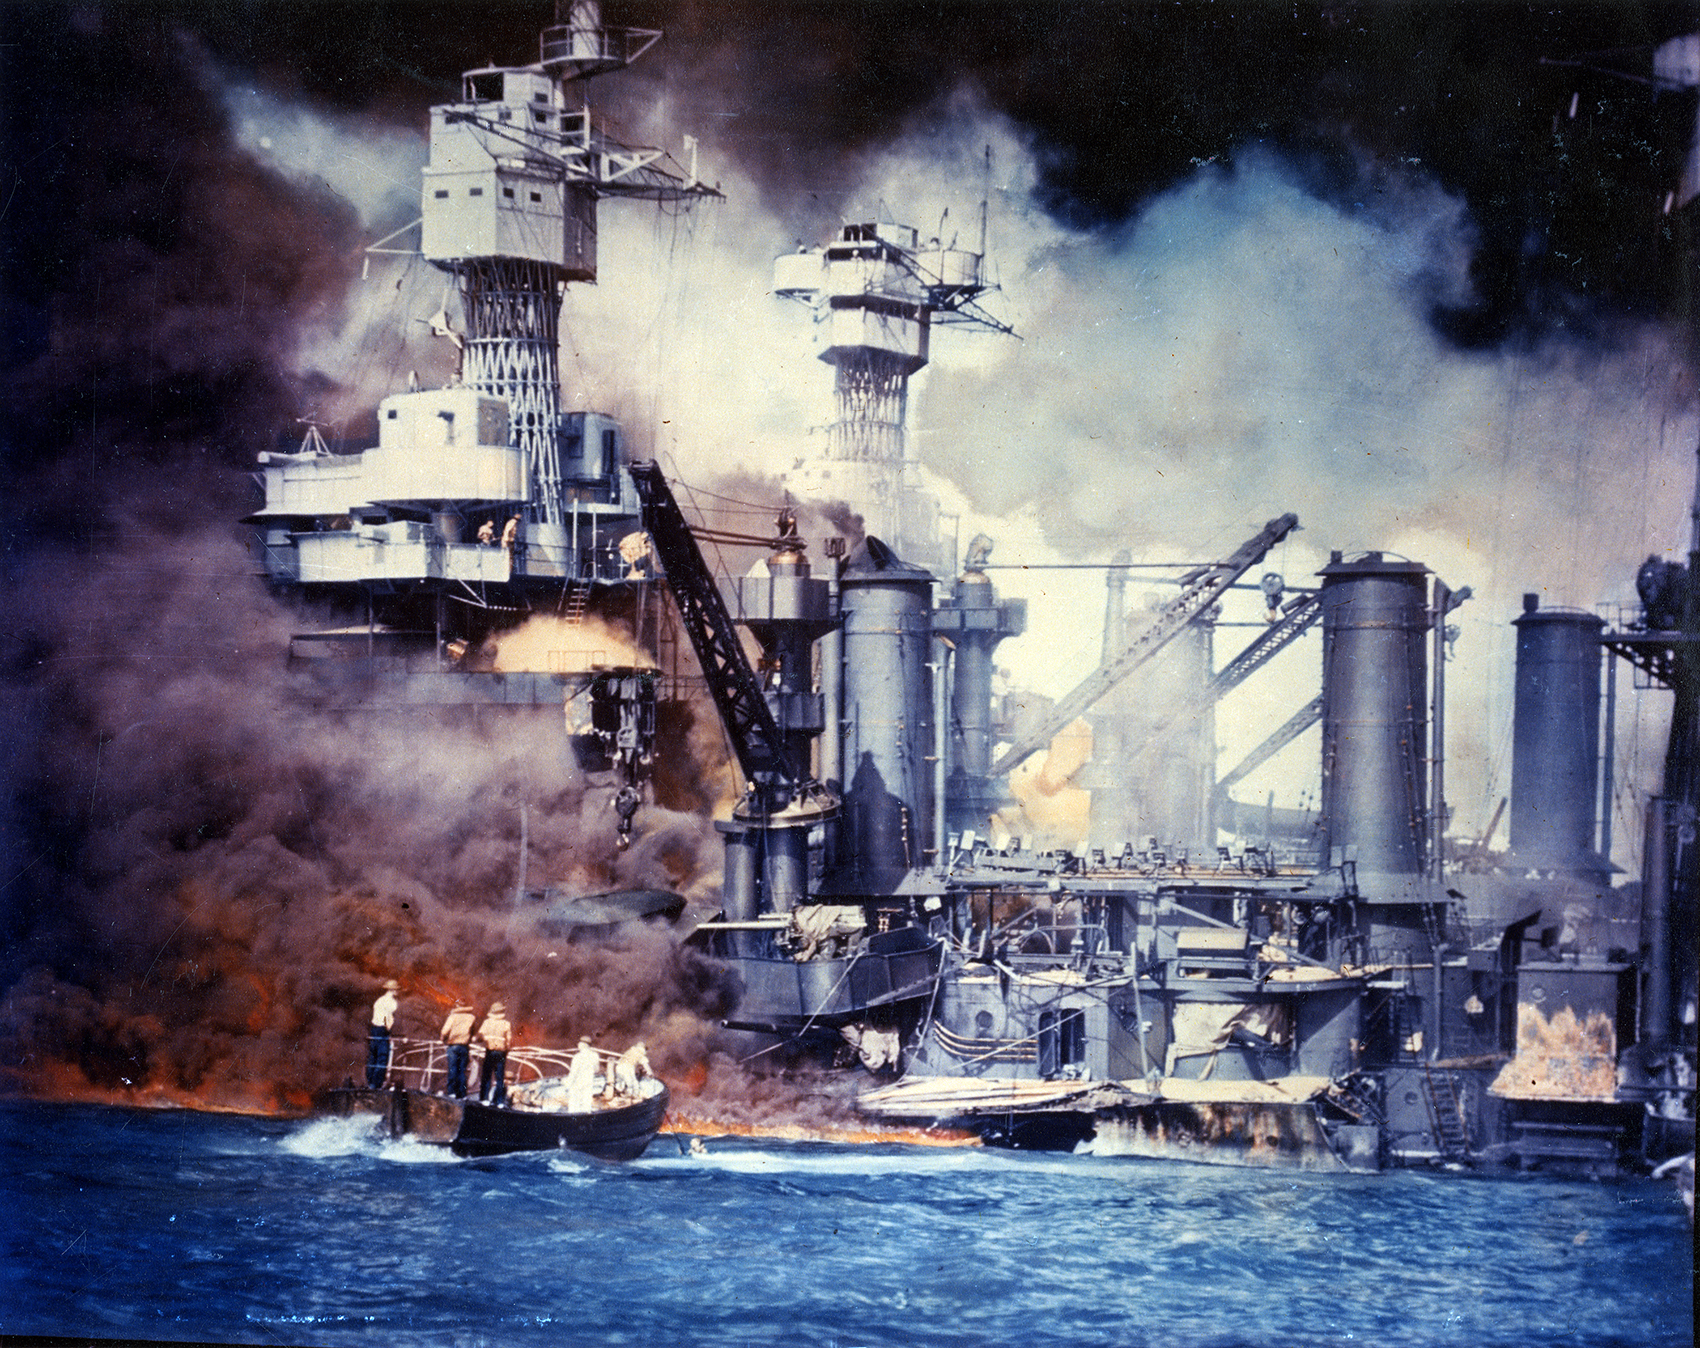 Sailors in a motor launch rescue a survivor from the water alongside the sunken USS West Virginia (BB-48) during or shortly after the Japanese air raid on Pearl Harbor. USS Tennessee (BB-43) is inboard of the sunken battleship. (Courtesy Army Signal Corps Collection/U.S. National Archives)